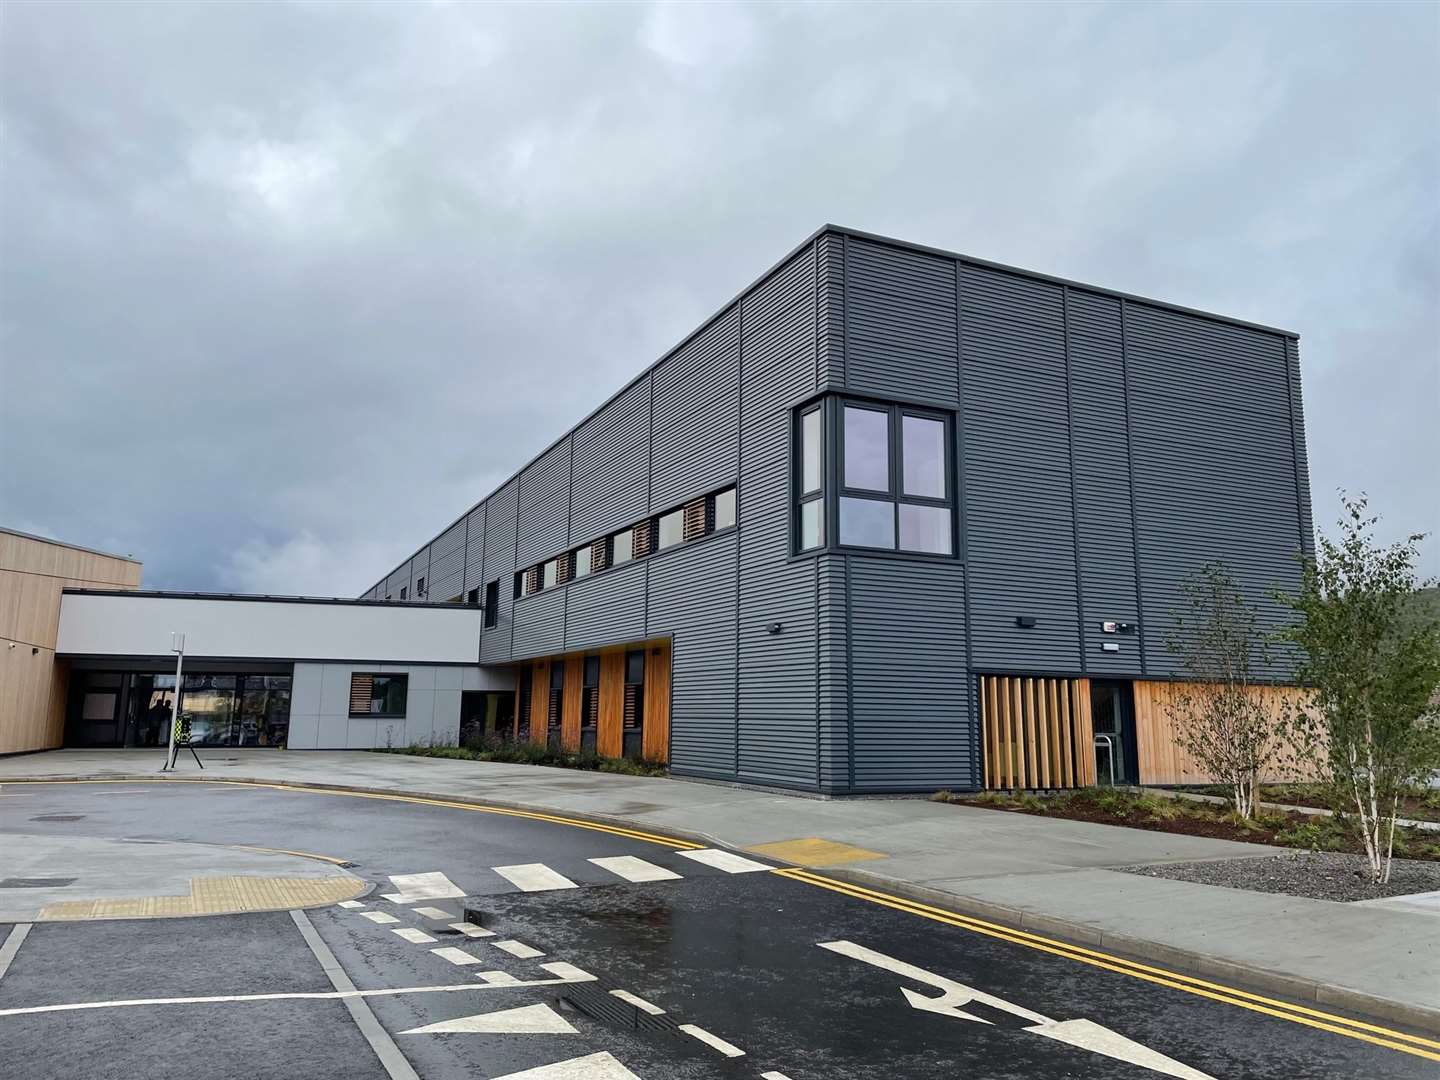 The new Badenoch and Strathspey Hospital building which is now home to Aviemore GP Practice.